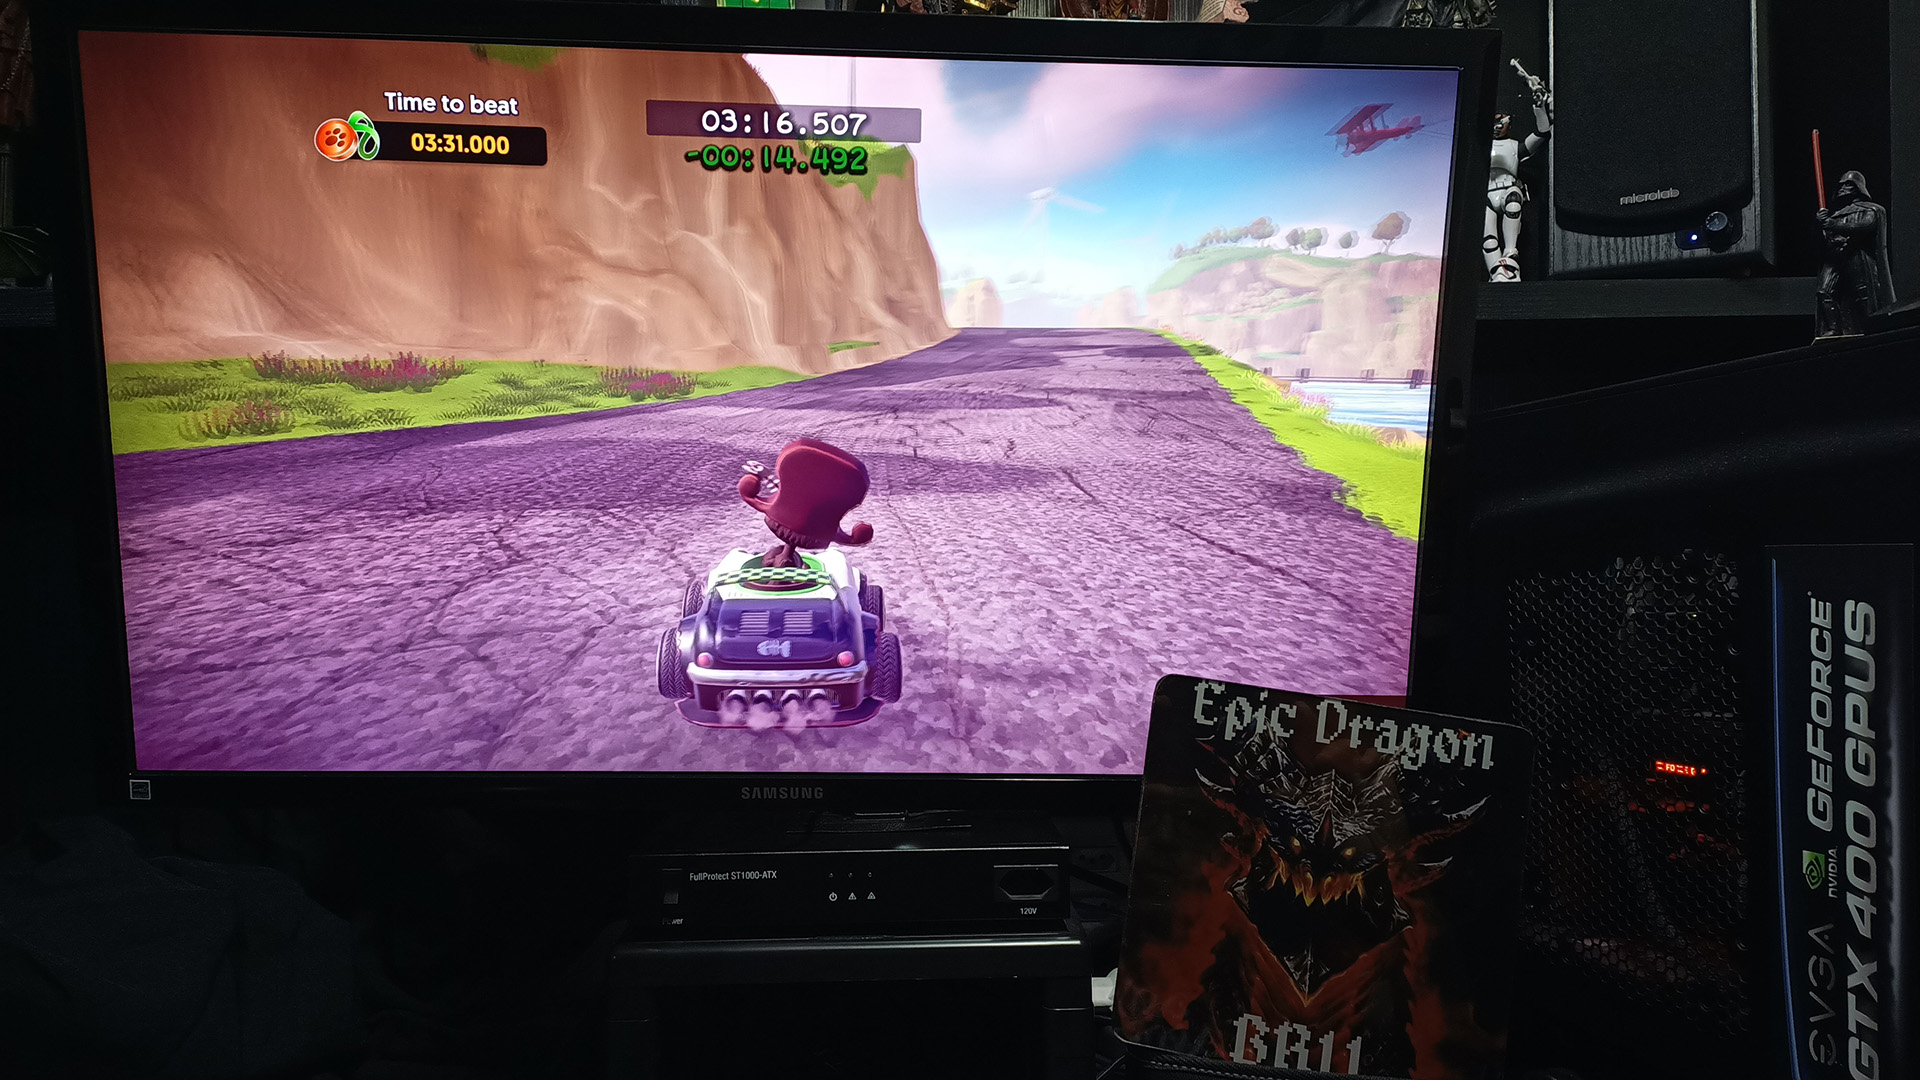 EpicDragon: Garfield Kart Furious Racing: Loopy Lagoon [Time Trial: 3 Laps] (PC) 0:03:16.507 points on 2022-08-11 17:25:46